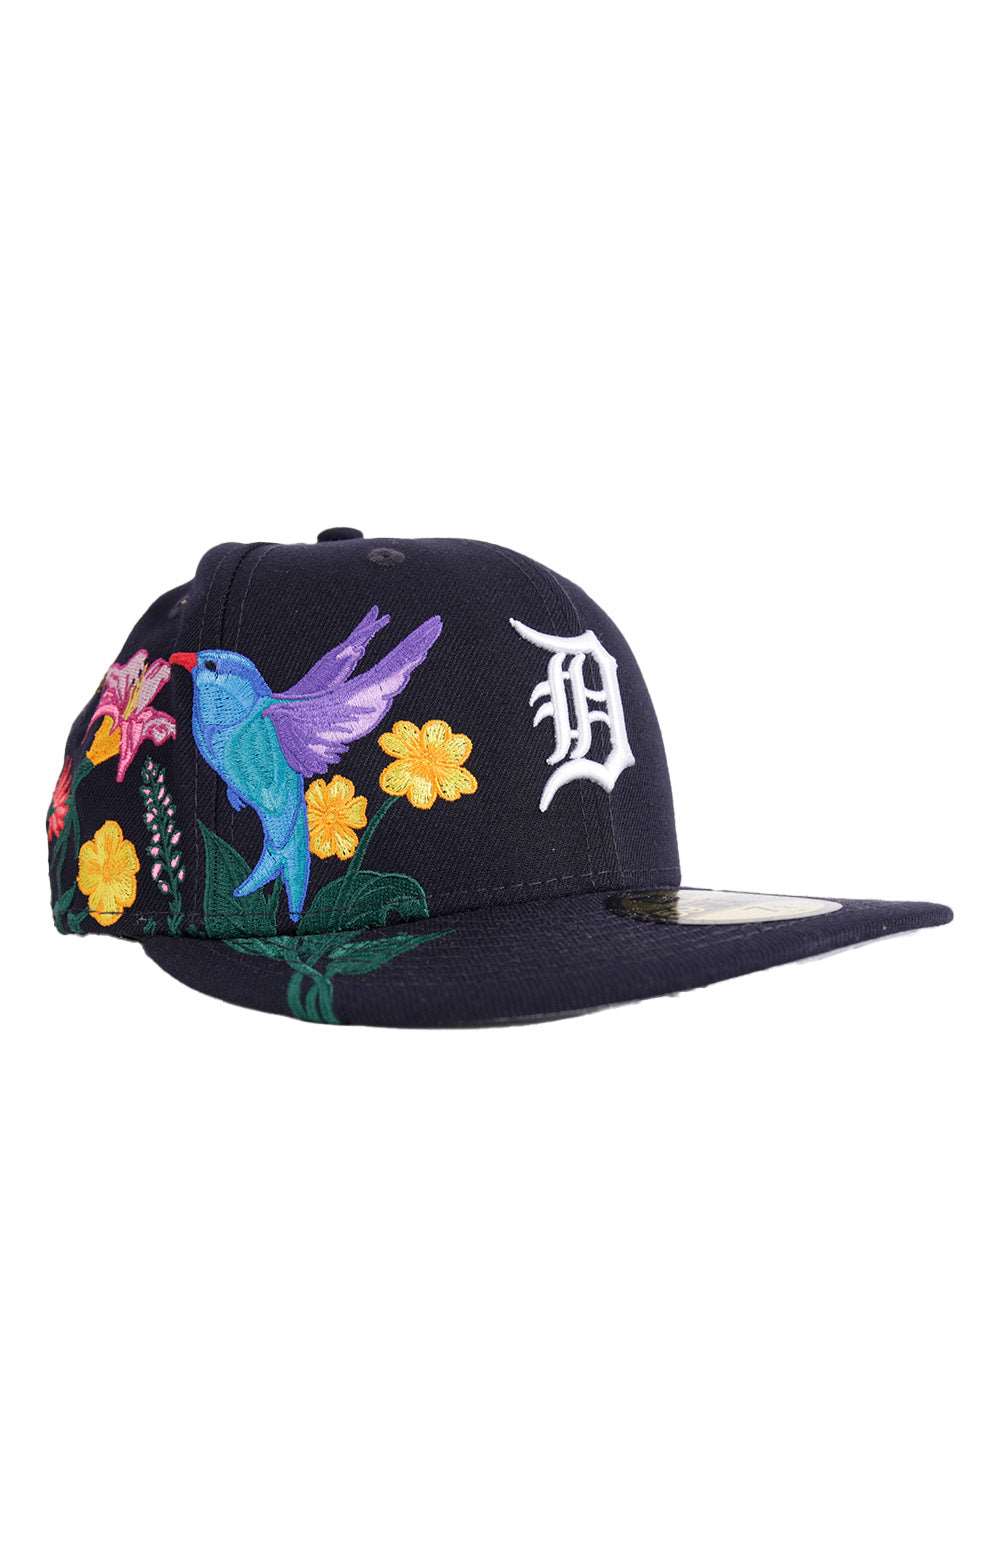 Detroit Tigers Blooming 59FIFTY Fitted Hat